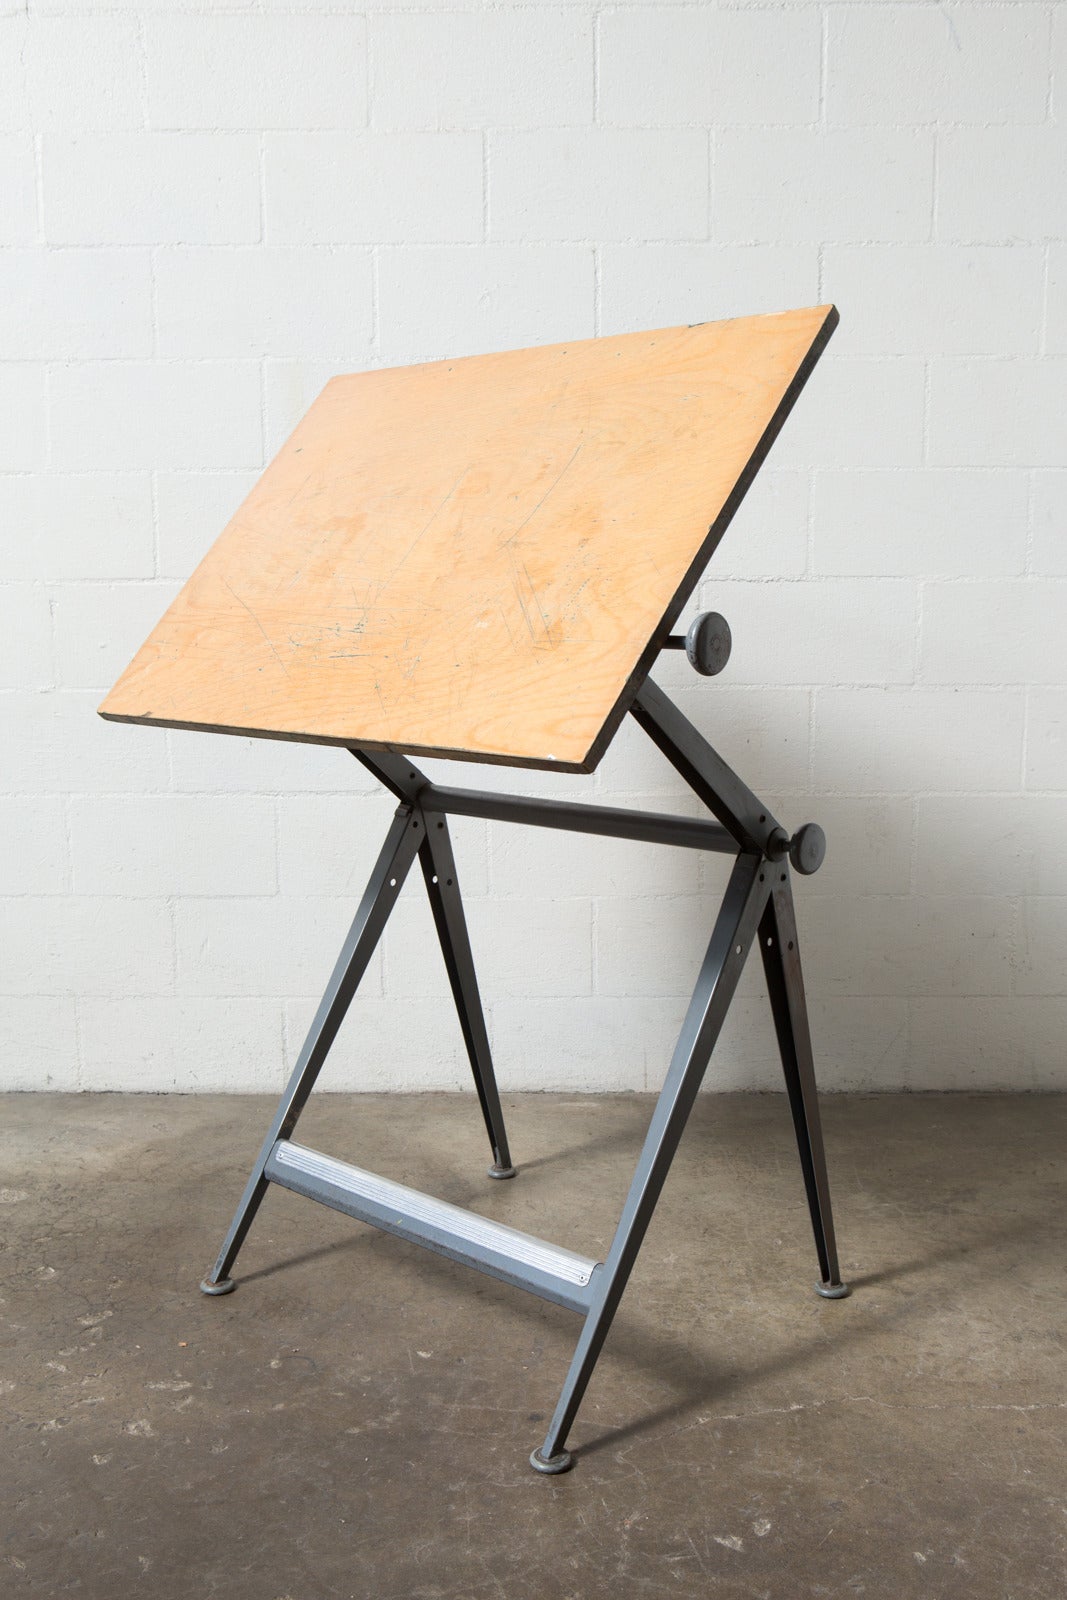 Wm. Rietveld and Friso Kramer "Reply" Drafting Table